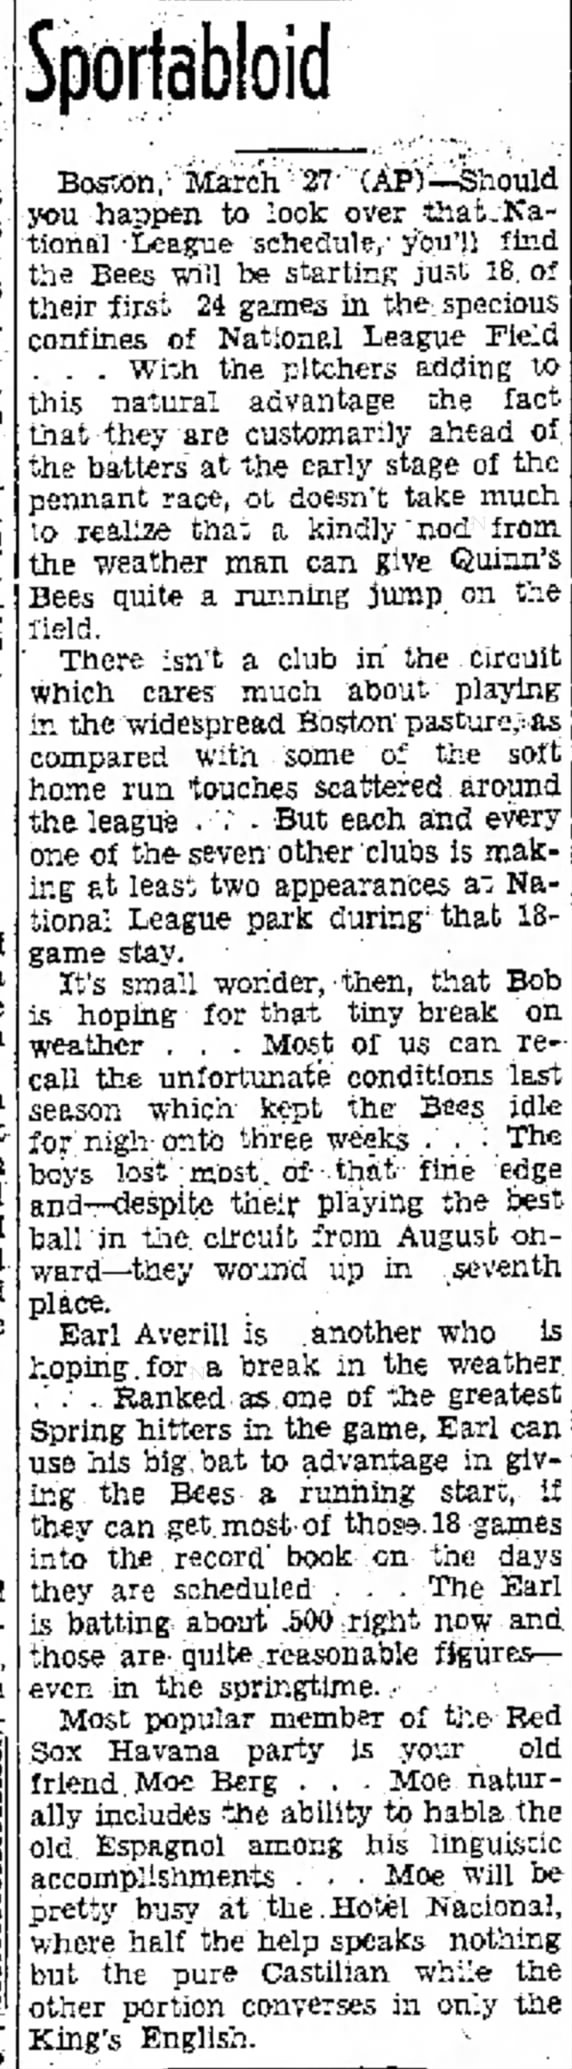 1941 AP Moe Berg Red Sox see Pete Appleton Havana party Portsmouth Herald NH March 27